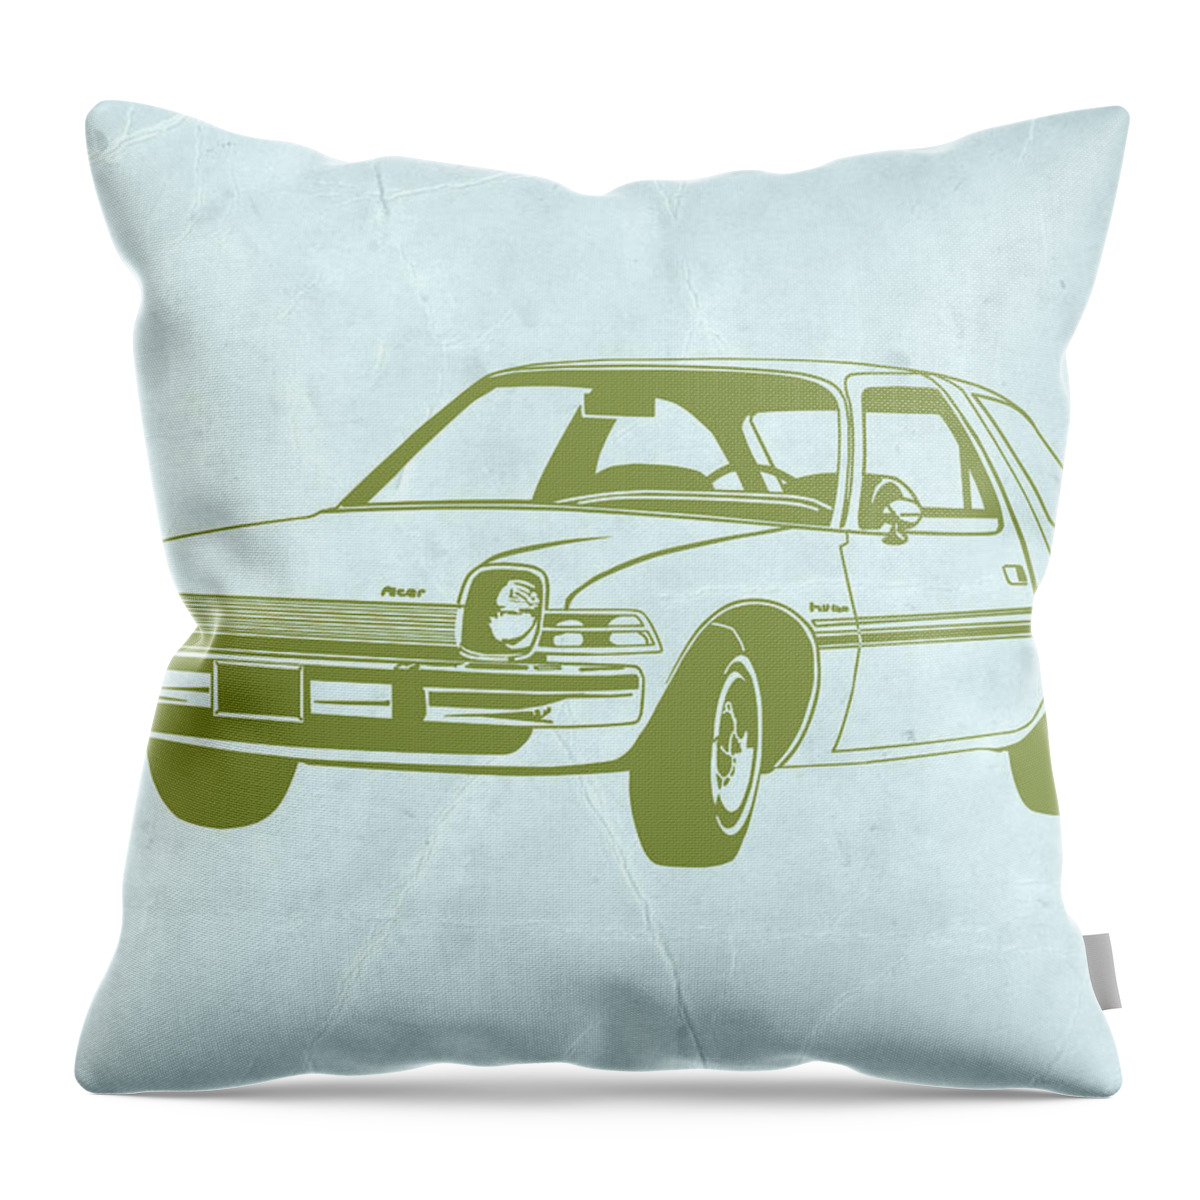 Auto Throw Pillow featuring the drawing My Favorite Car by Naxart Studio